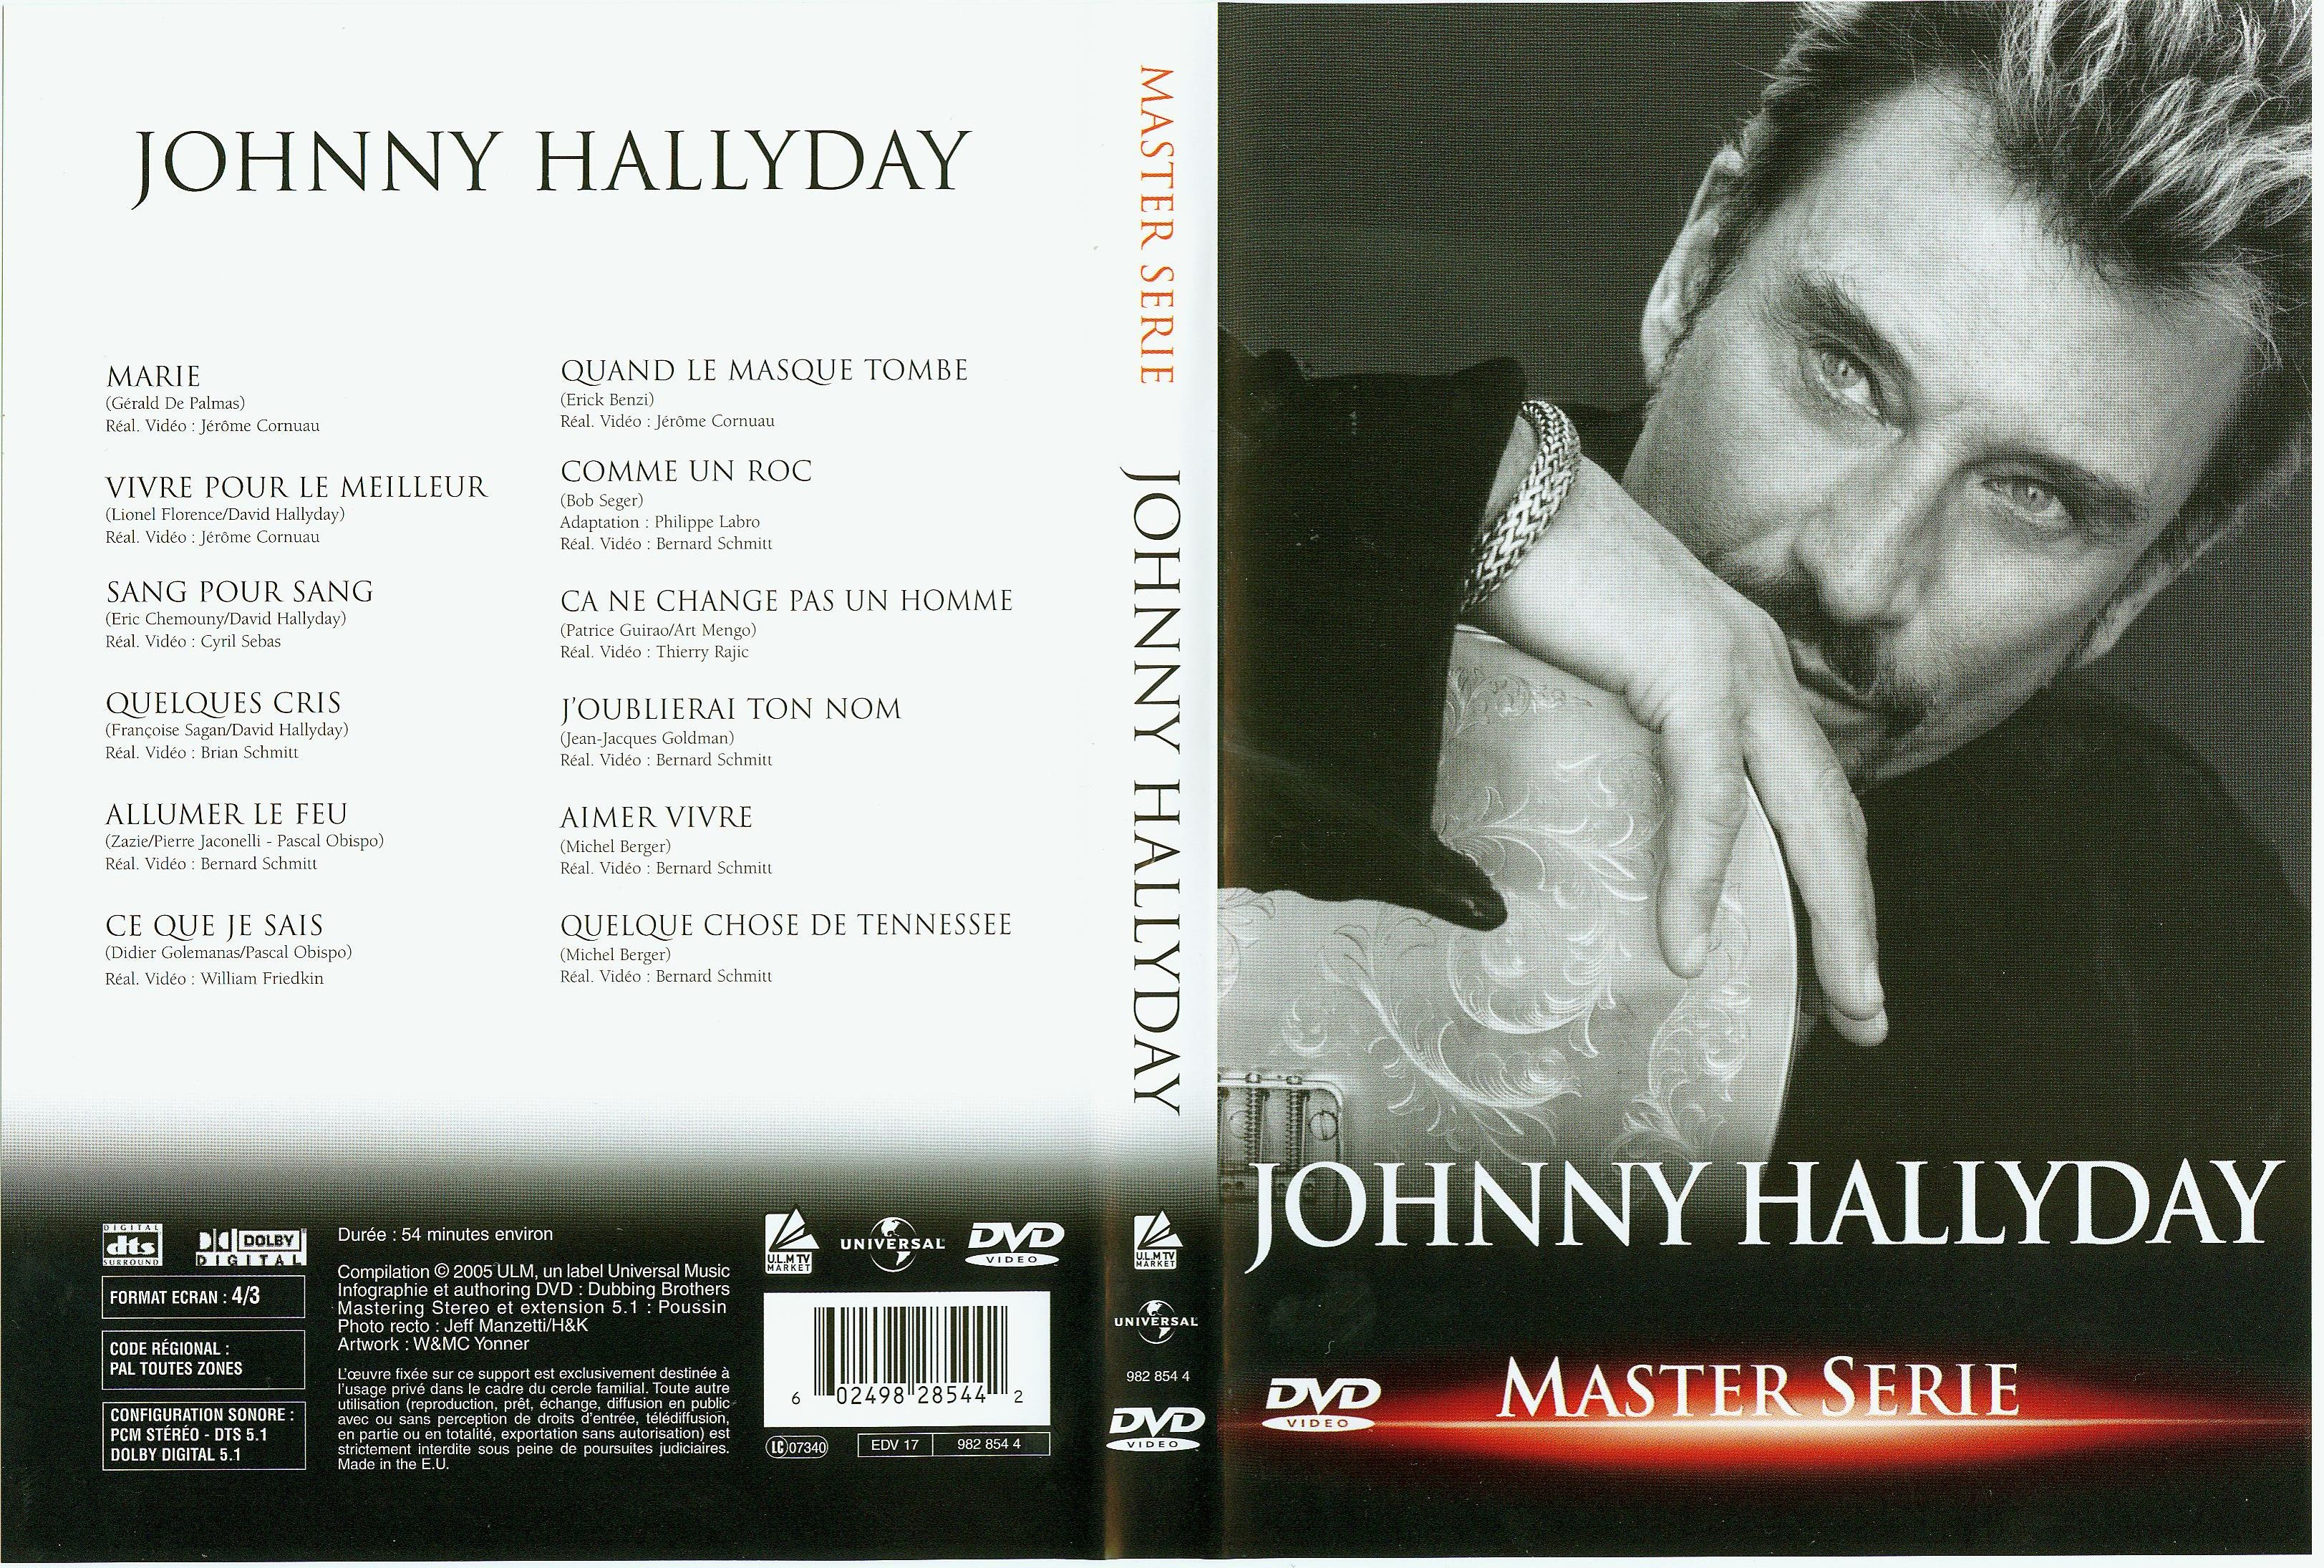 Jaquette DVD Johnny Hallyday Master Serie